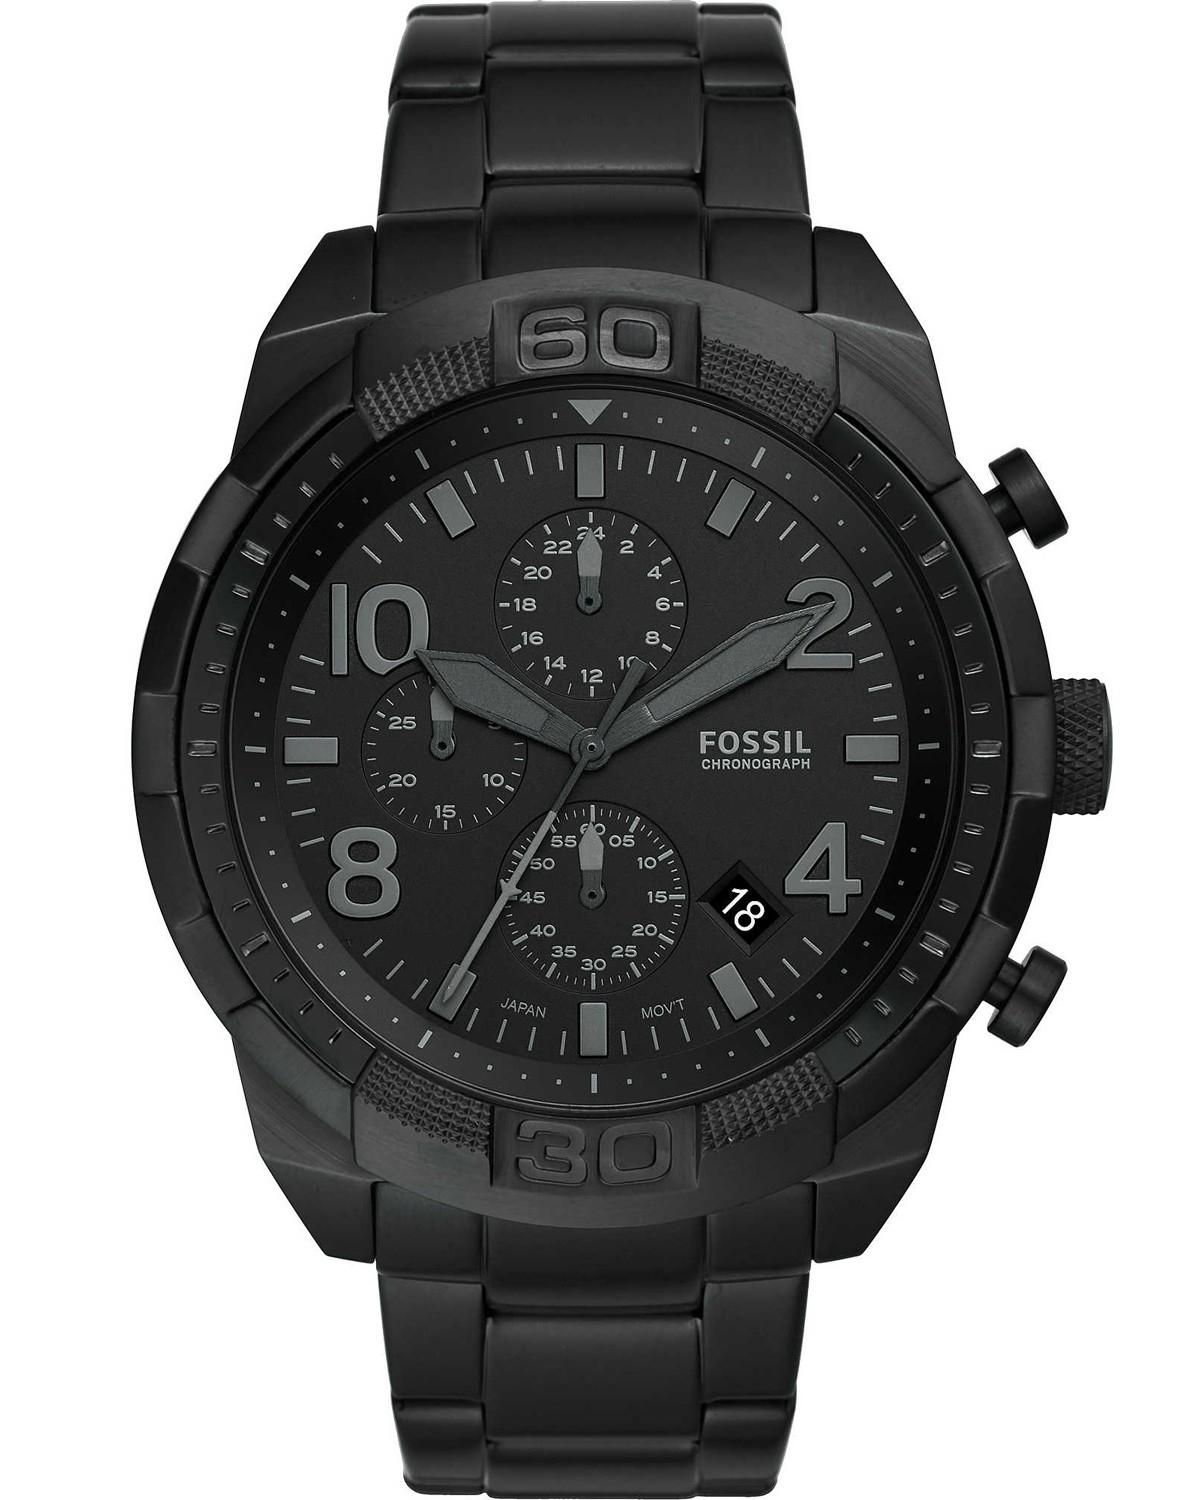 FOSSIL Bronson Chronograph - FS5712, Black case with Stainless Steel Bracelet